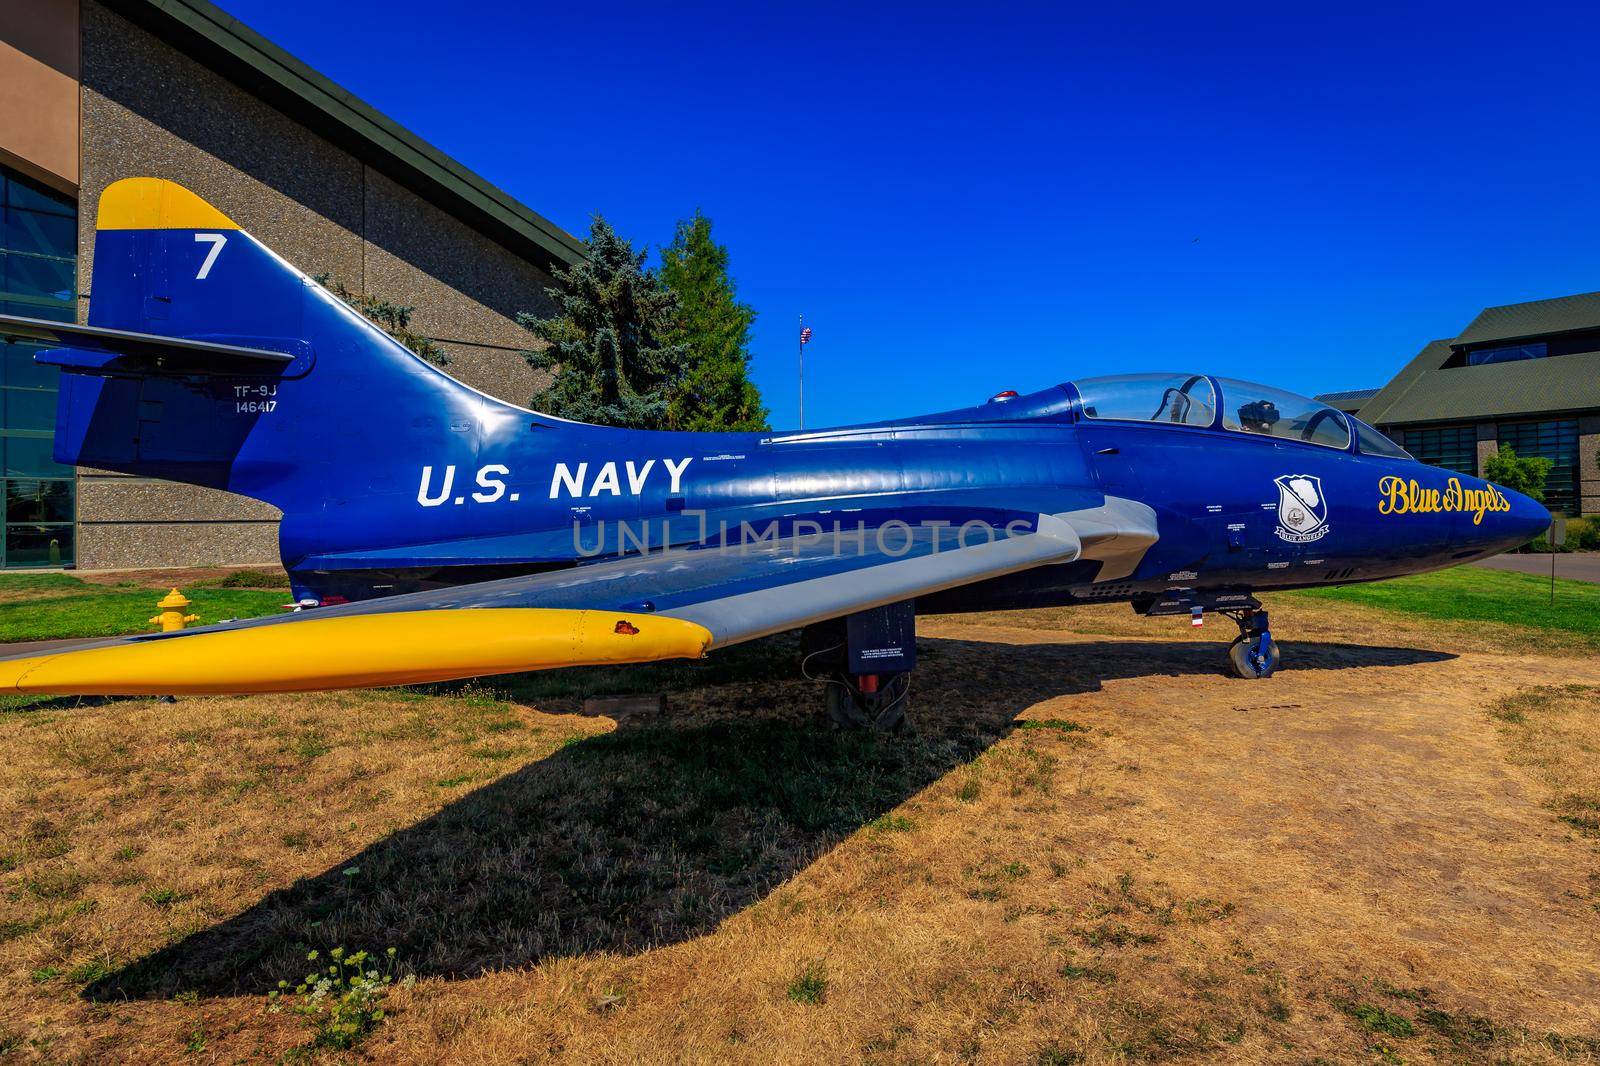 McMinnville, Oregon - August 21, 2017: Grumman TF-9J Cougar fighter aircraft in the color of the "Blue Angels" on exhibition at Evergreen Aviation & Space Museum.